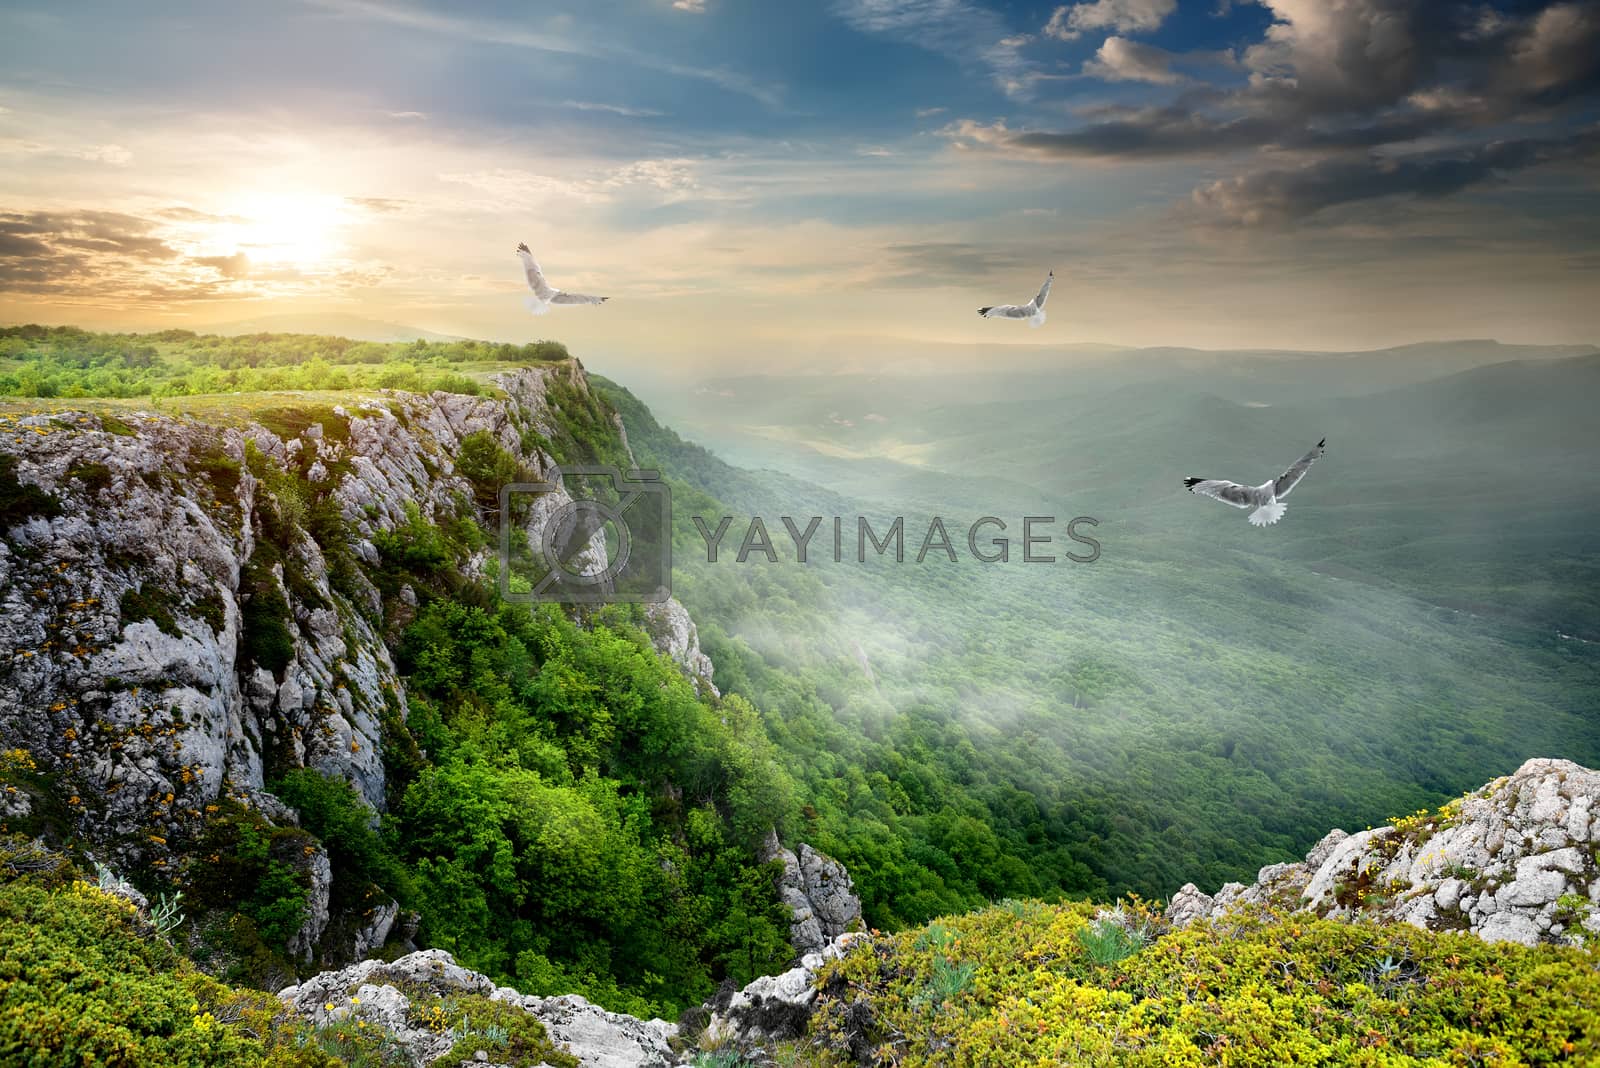 Royalty free image of Birds over plateau by Givaga